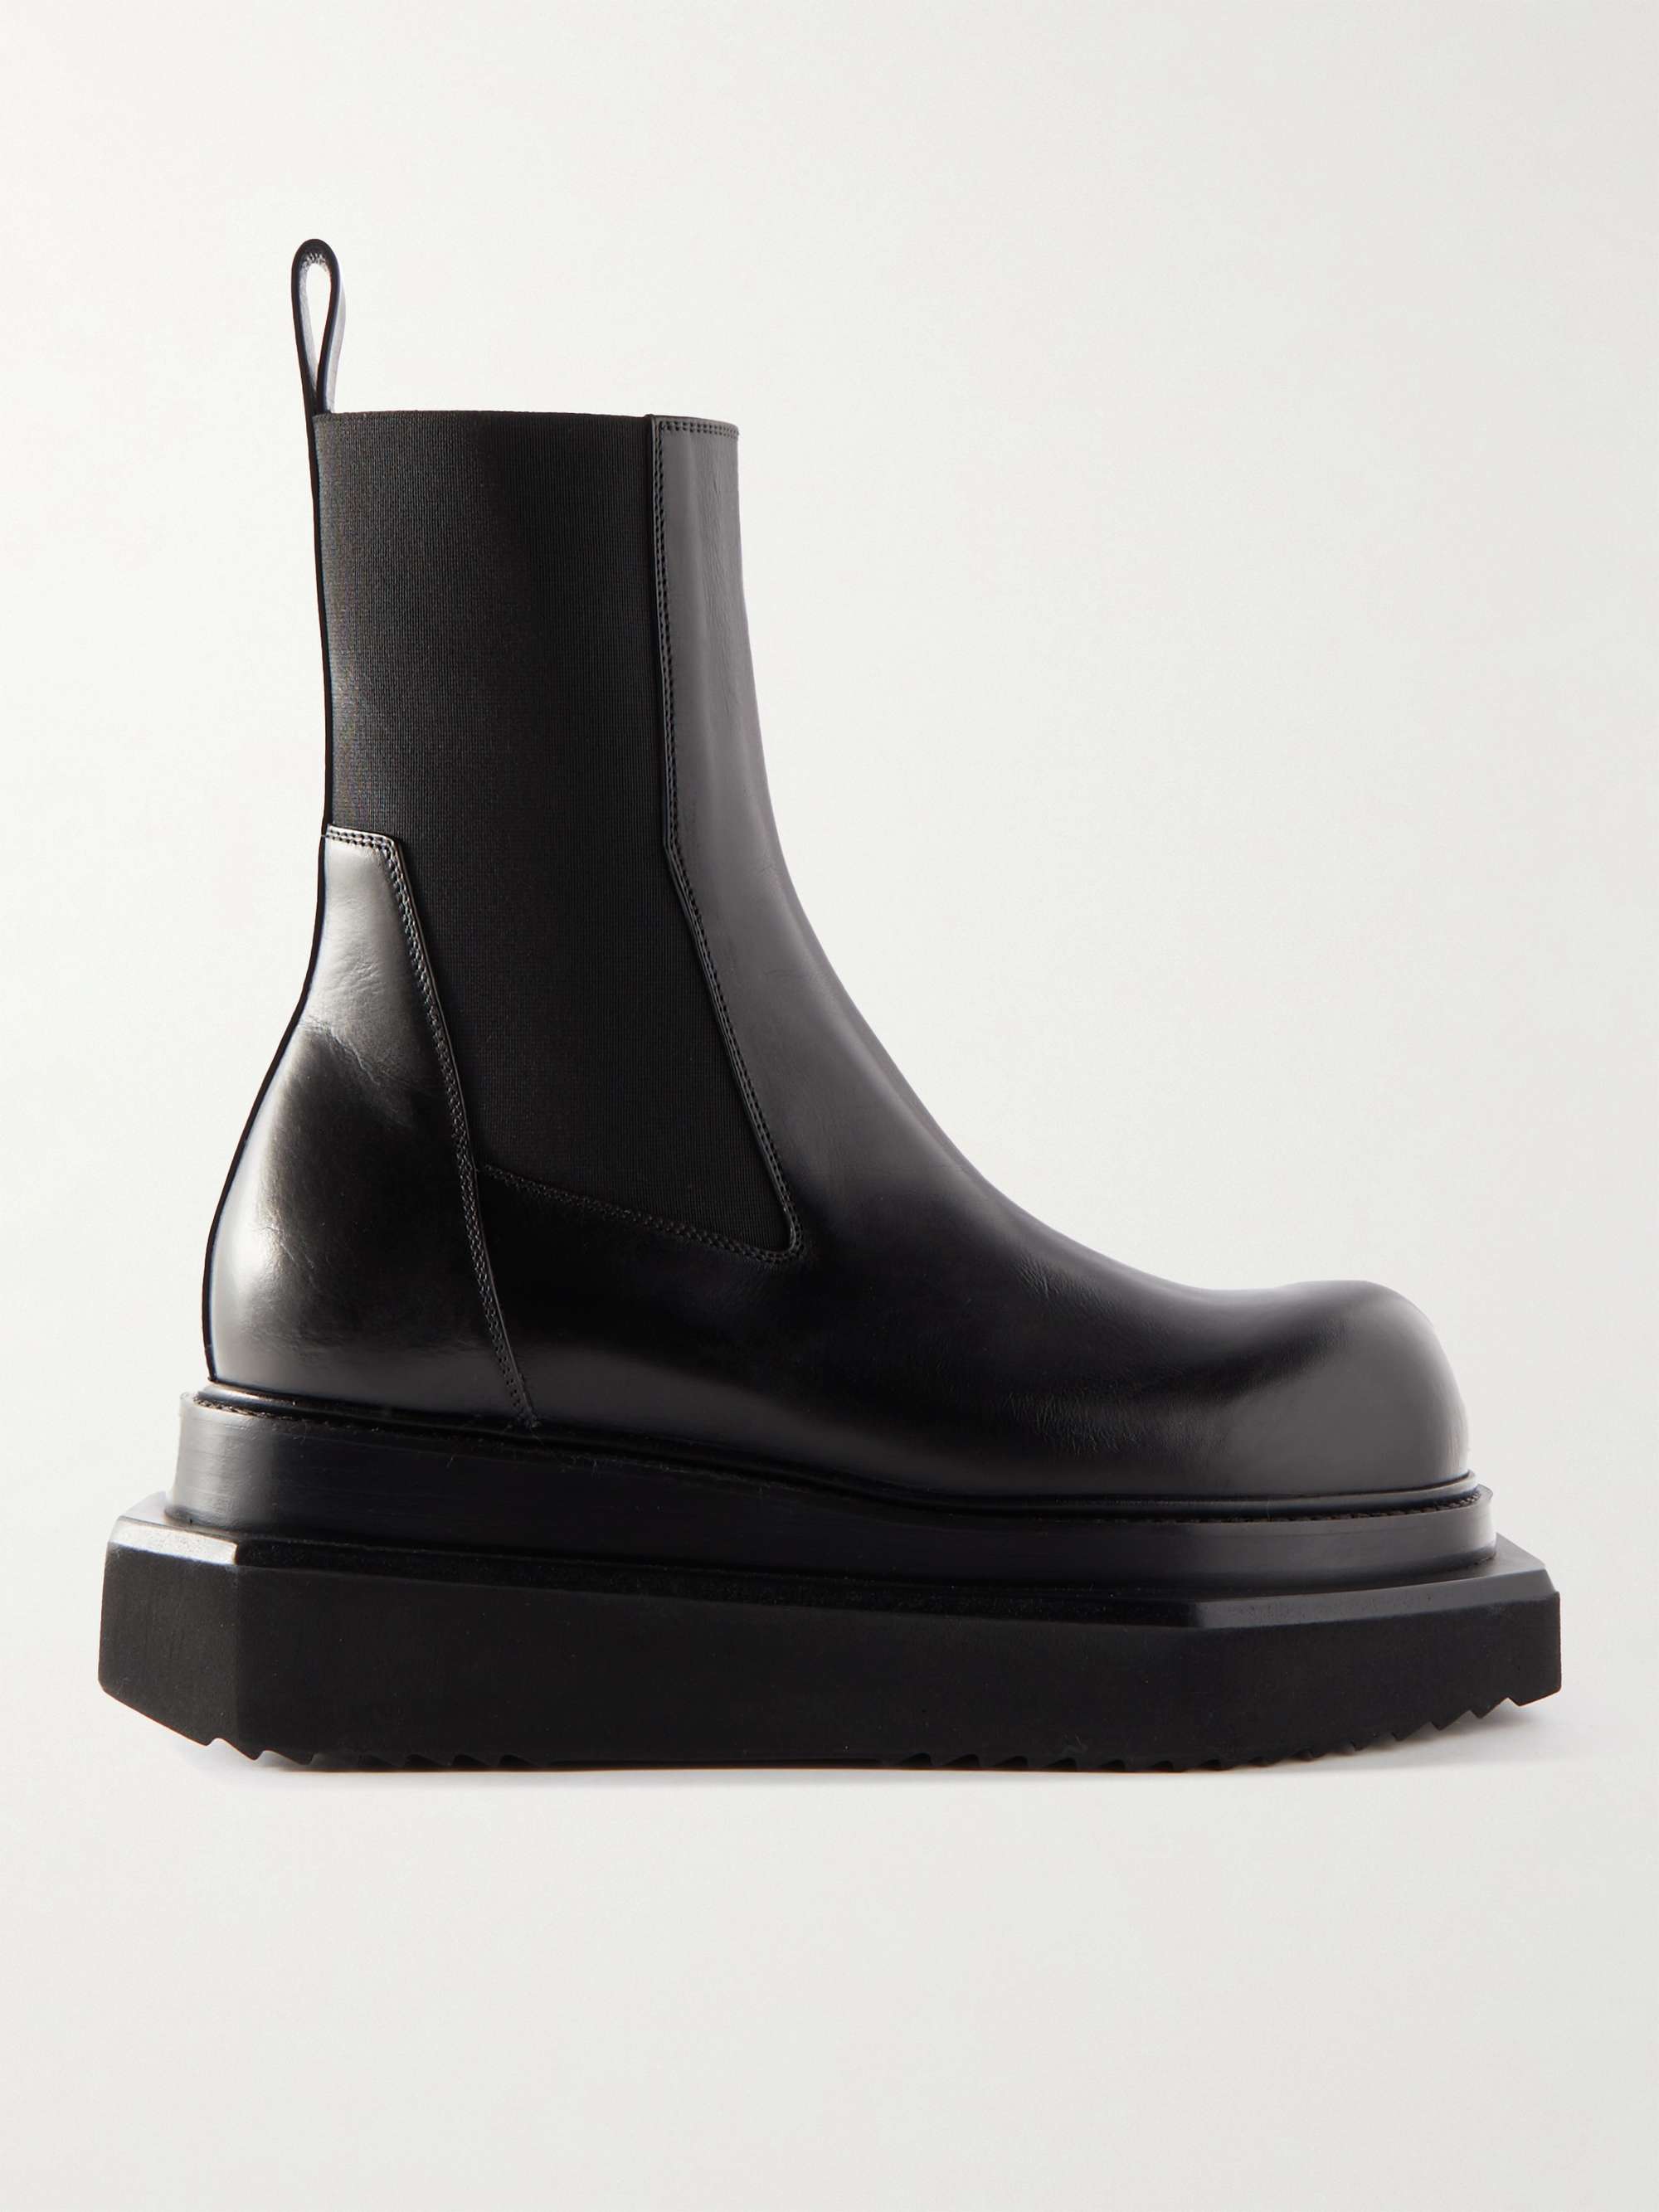 RICK OWENS Beatle Turbo Cyclops Leather Chelsea Boots